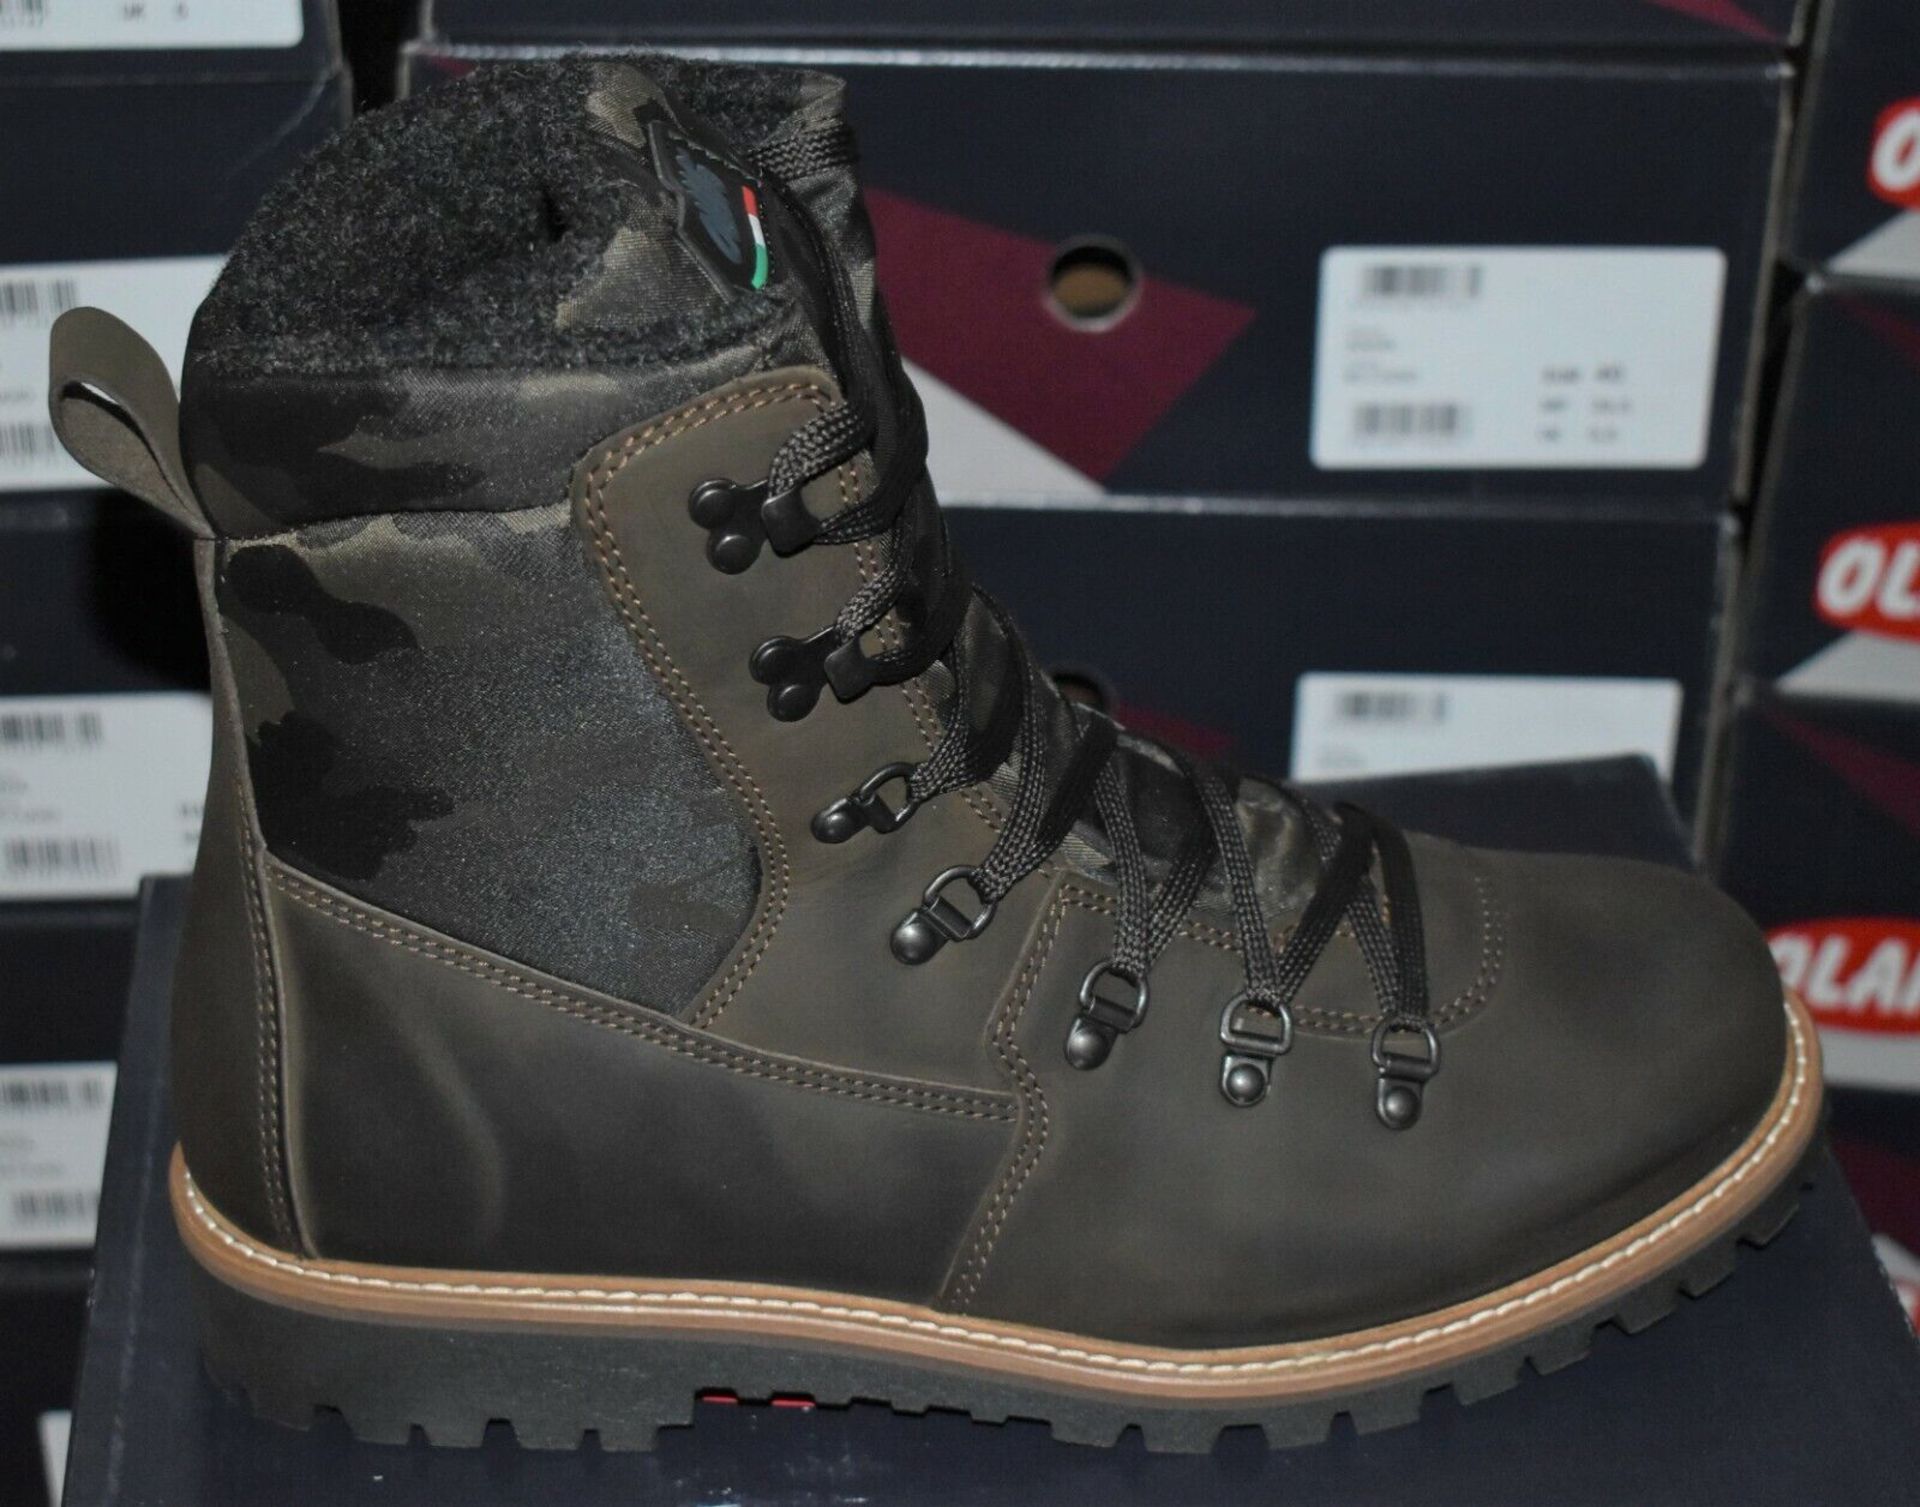 1 x Pair of Designer Olang Men's Winter Boots - Piave Thinsulate BTX 84 Caffe - Euro Size 44 - - Image 4 of 6